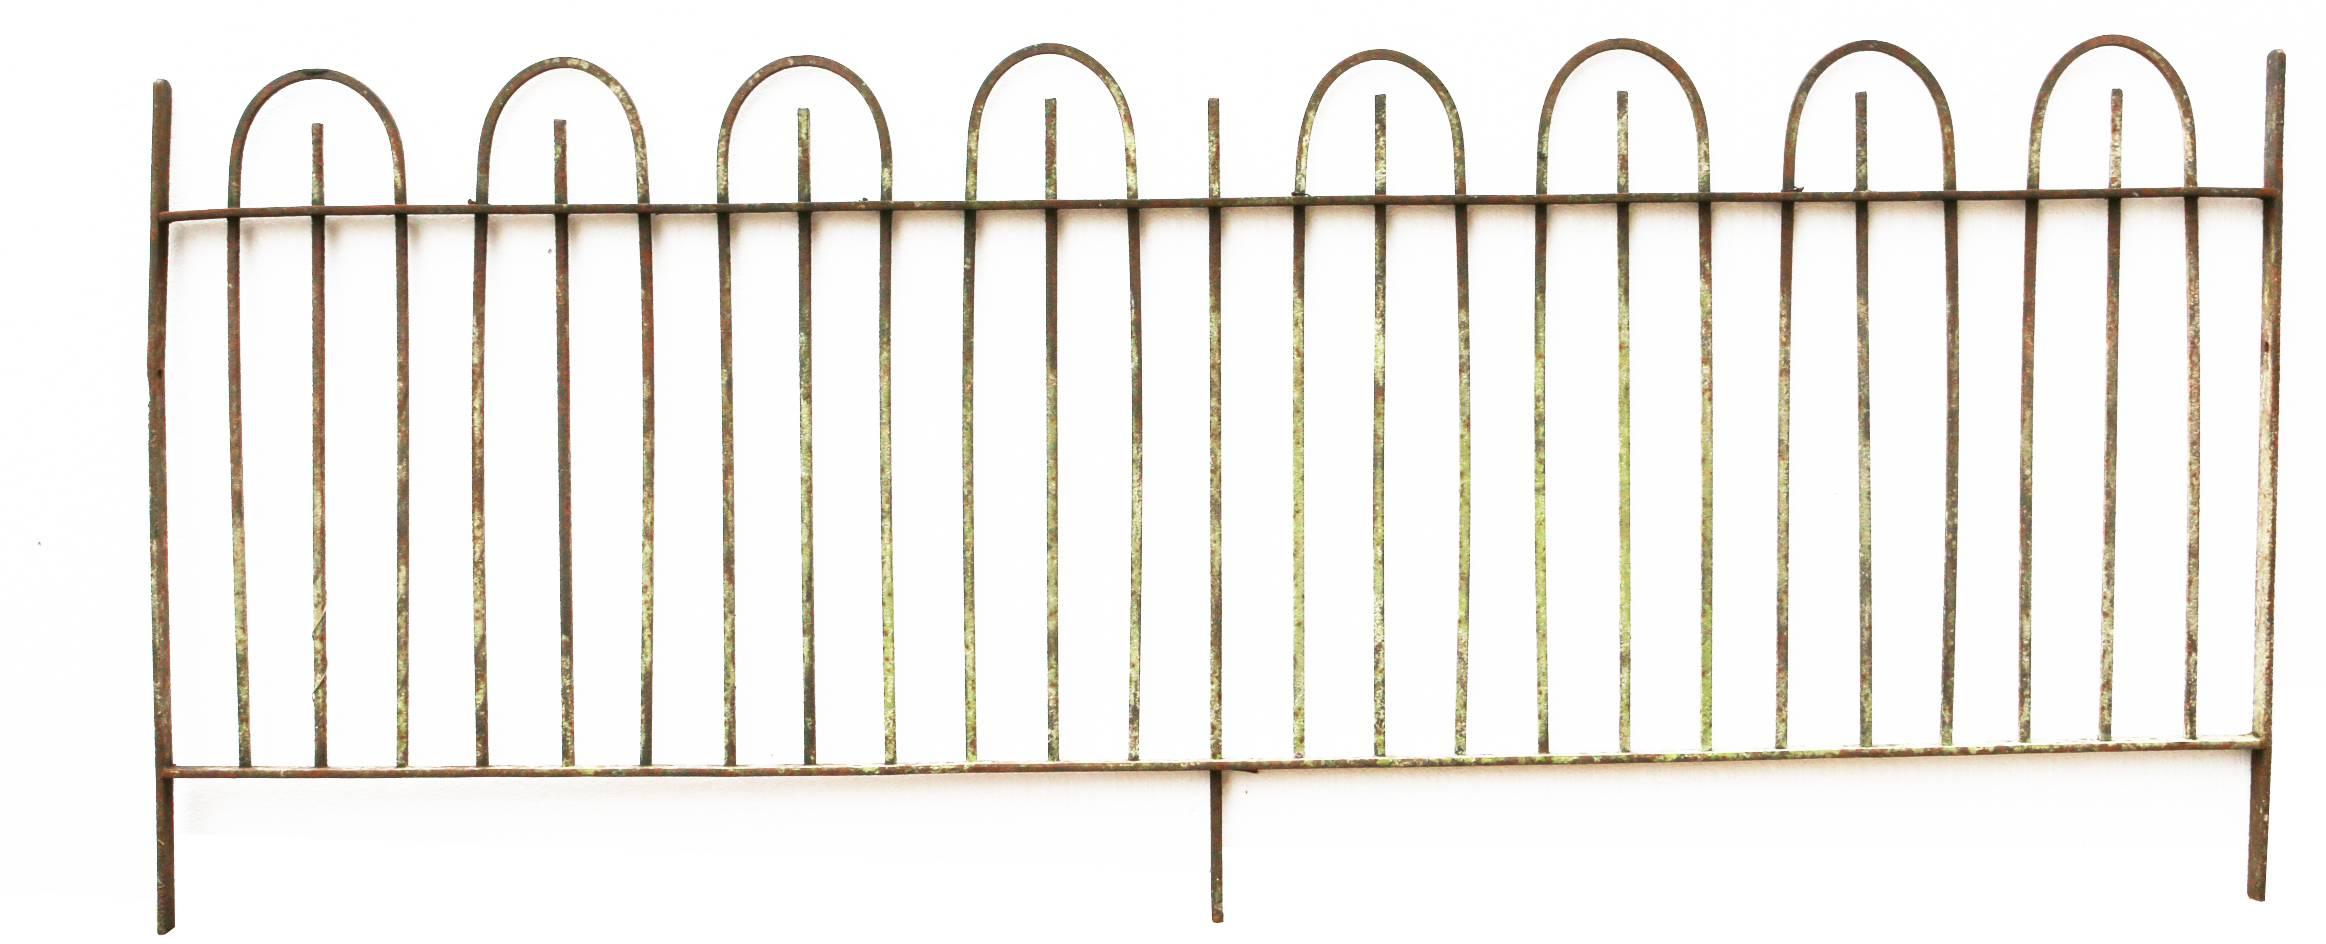 This set of railings and side gate are in good structural condition with surface rust throughout. The gate hinges are in good condition and the latch works. 12.7 Meters
Gate H 125 x W 97 cm
Railings H 69 cm  (bottom of the railings to the top of